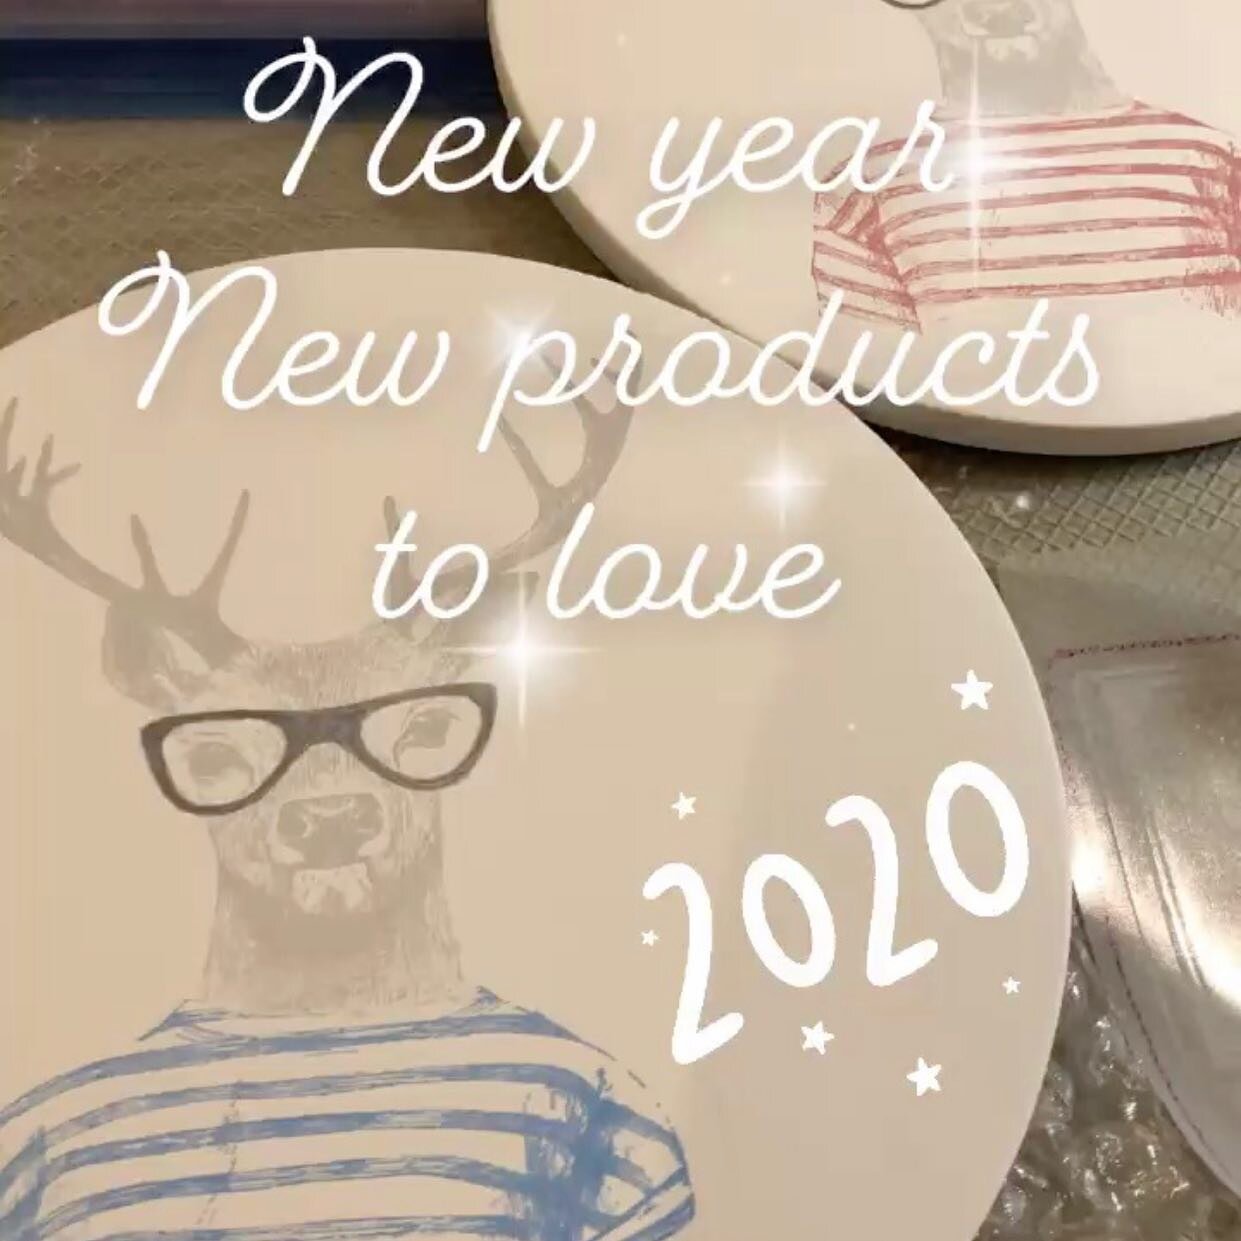 Happy New year to all our customers and friends 
#toronto #canada #ceramics #tableware #canadiangifts #deer #trivet #commealamaisonbyfrance #handmade #homedecor